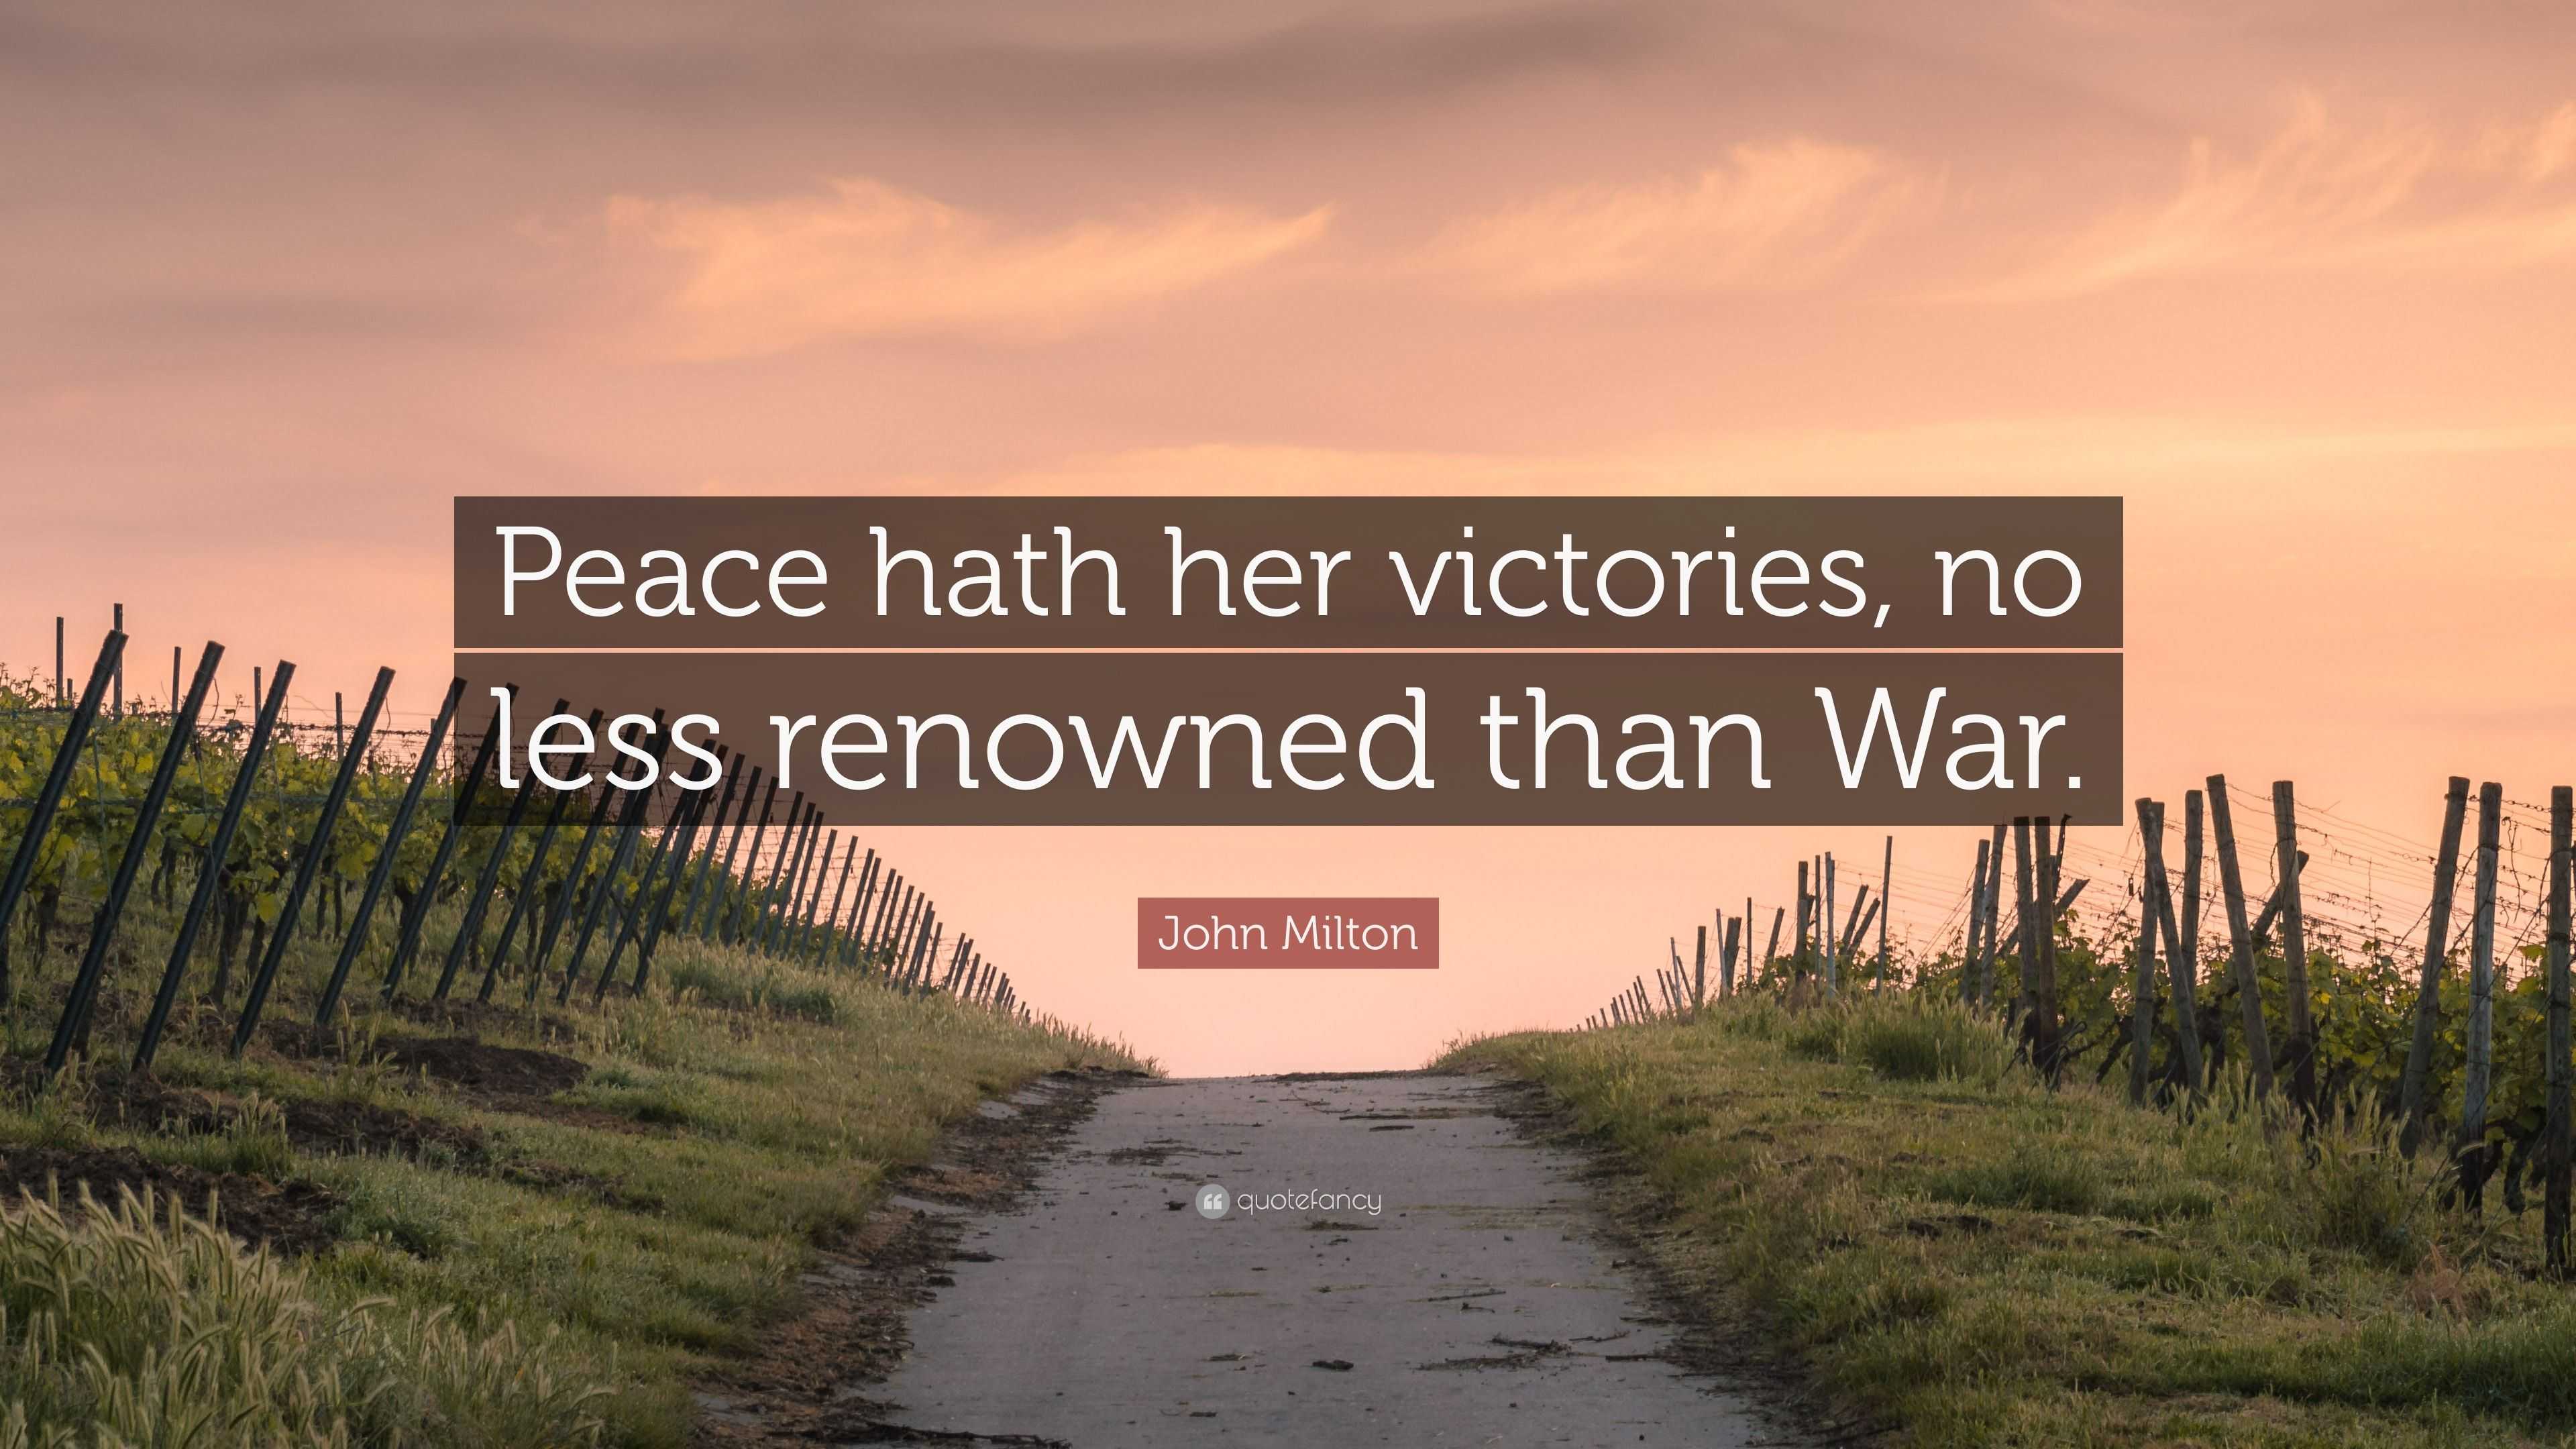 peace hath her victories